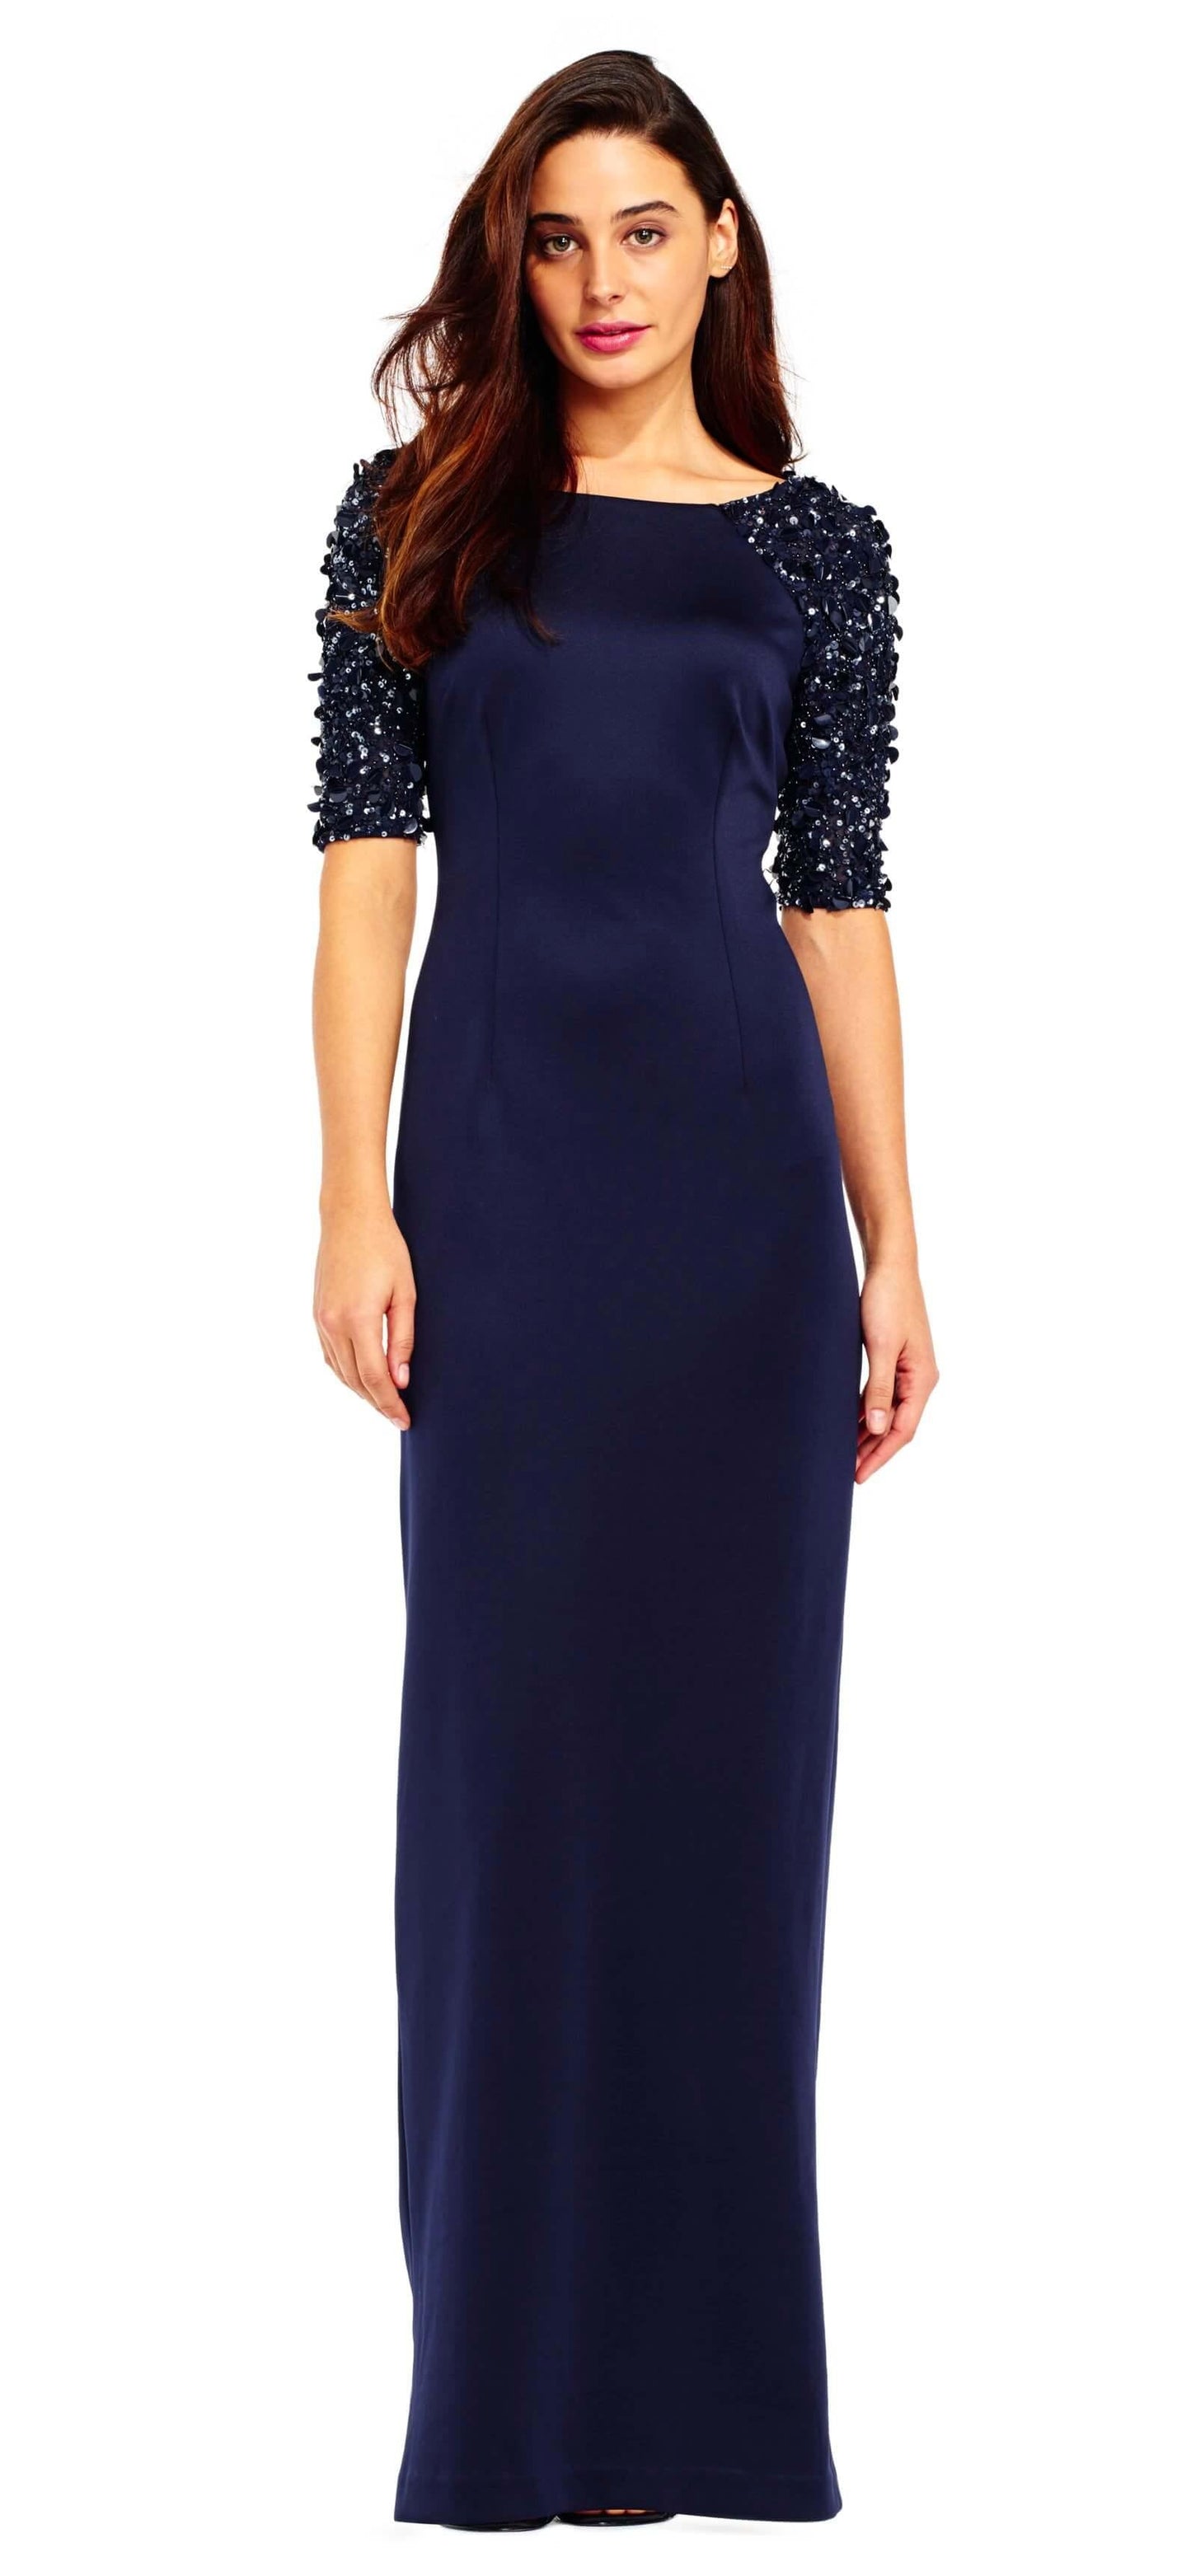 Adrianna Papell Long Formal Evening Dress - The Dress Outlet Adrianna Papell